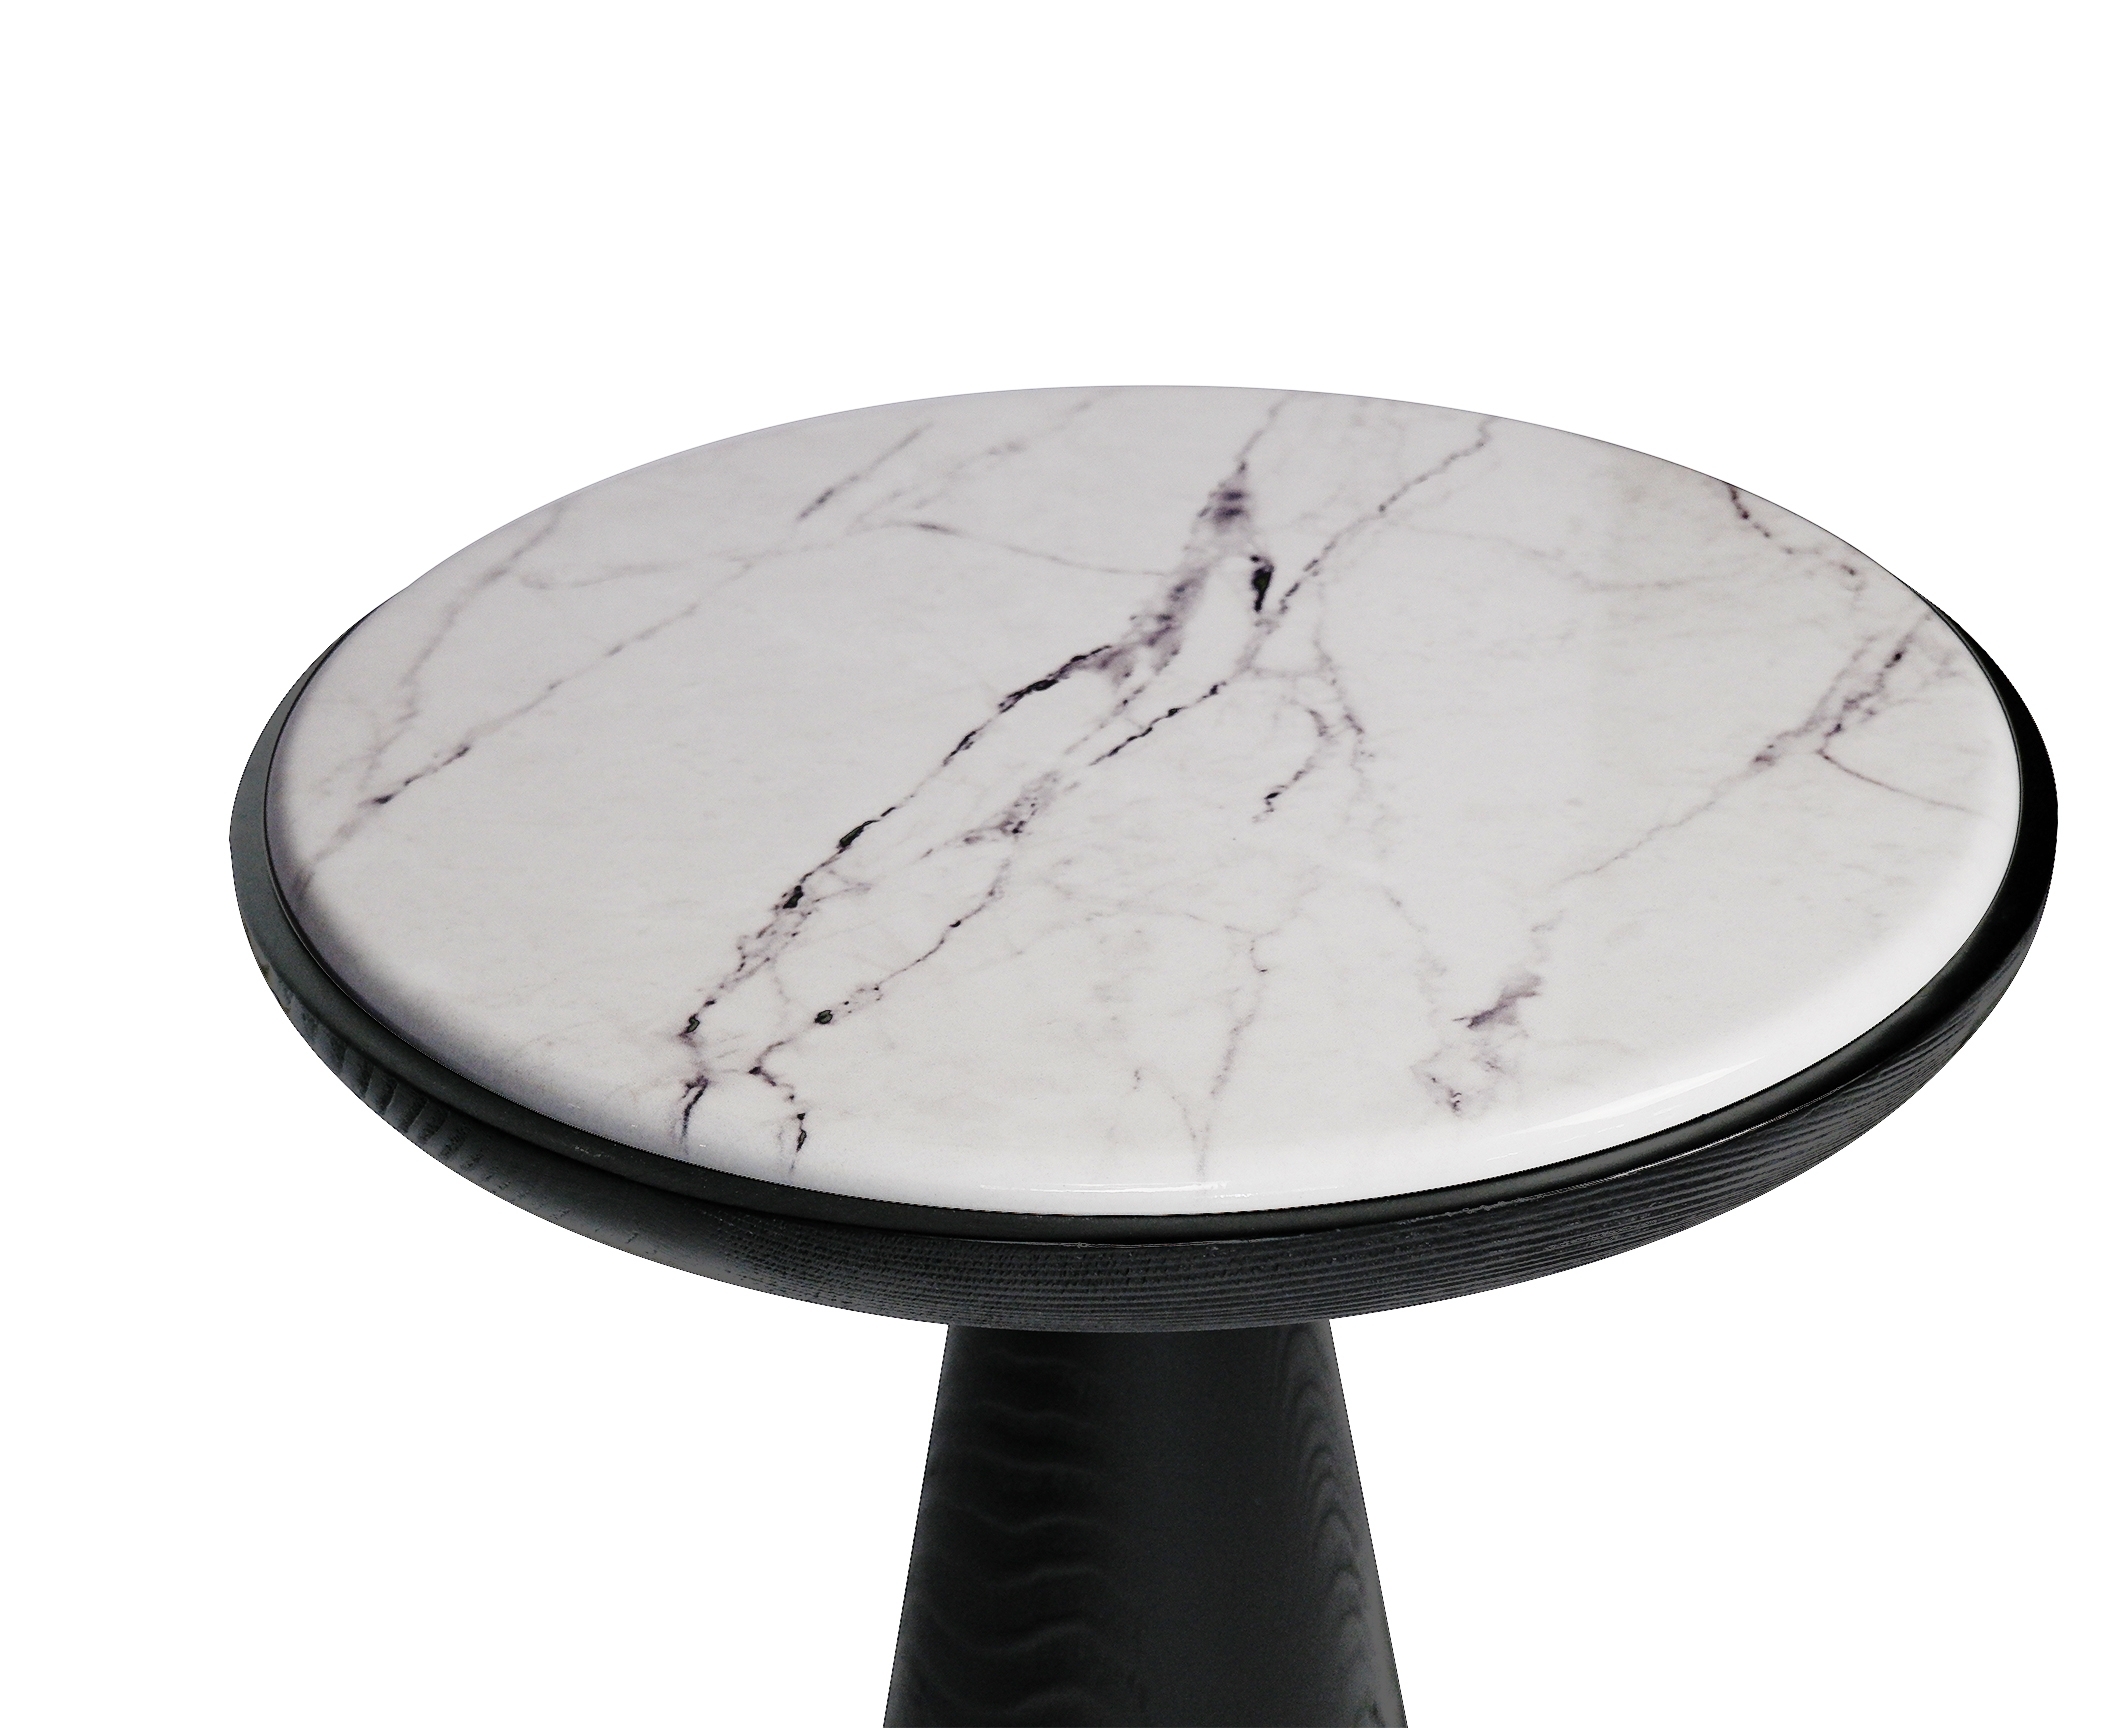 Ming Side Table